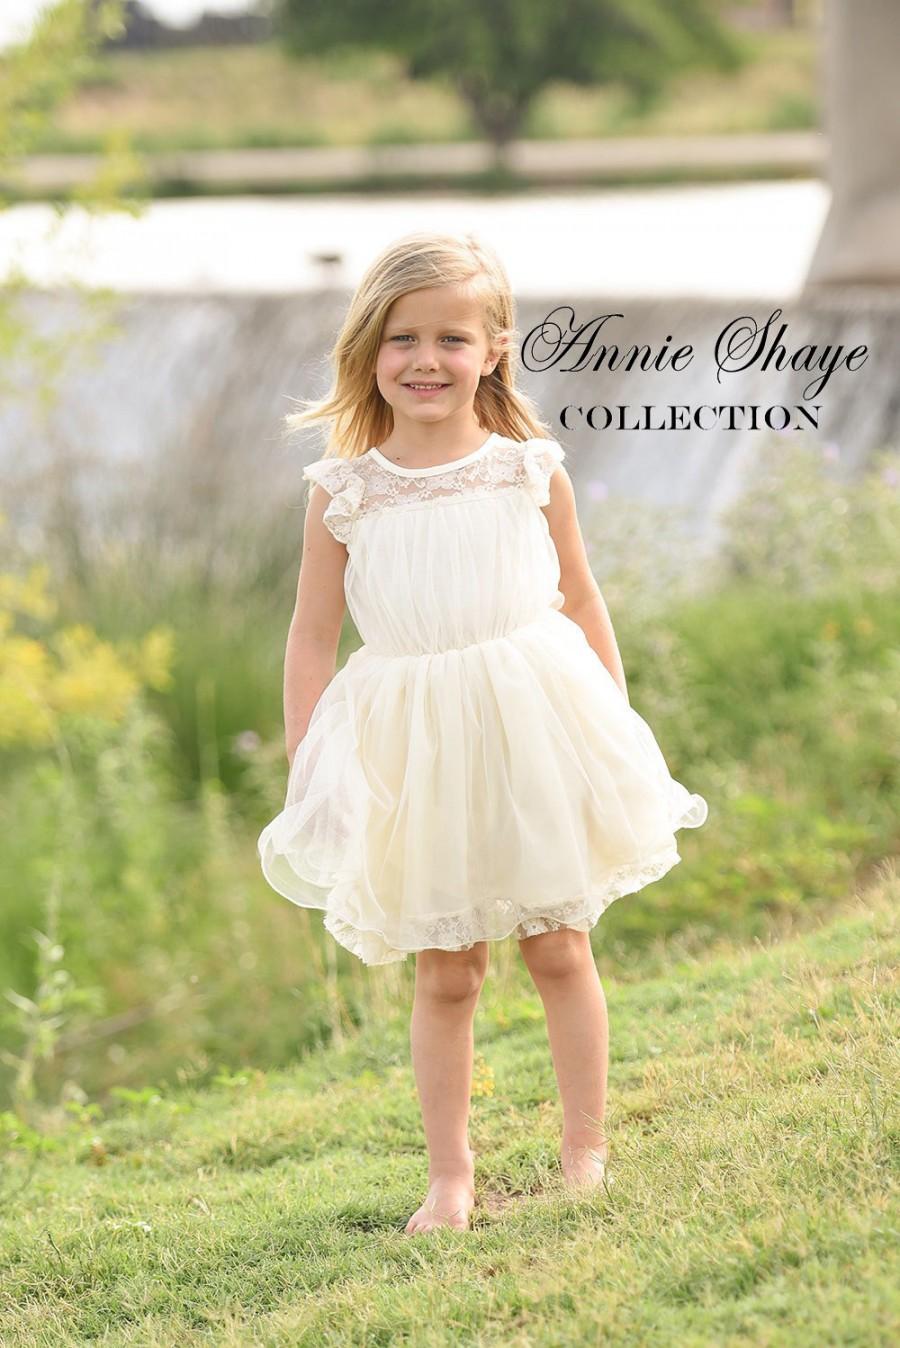 Mariage - Olivia Dress by Annie Shaye - flower girl dress ivory, lace toddler dress made for girls ages 9-12M,1t,2t,3t,4t,5,6,7,8,9,10,11,12,13,14